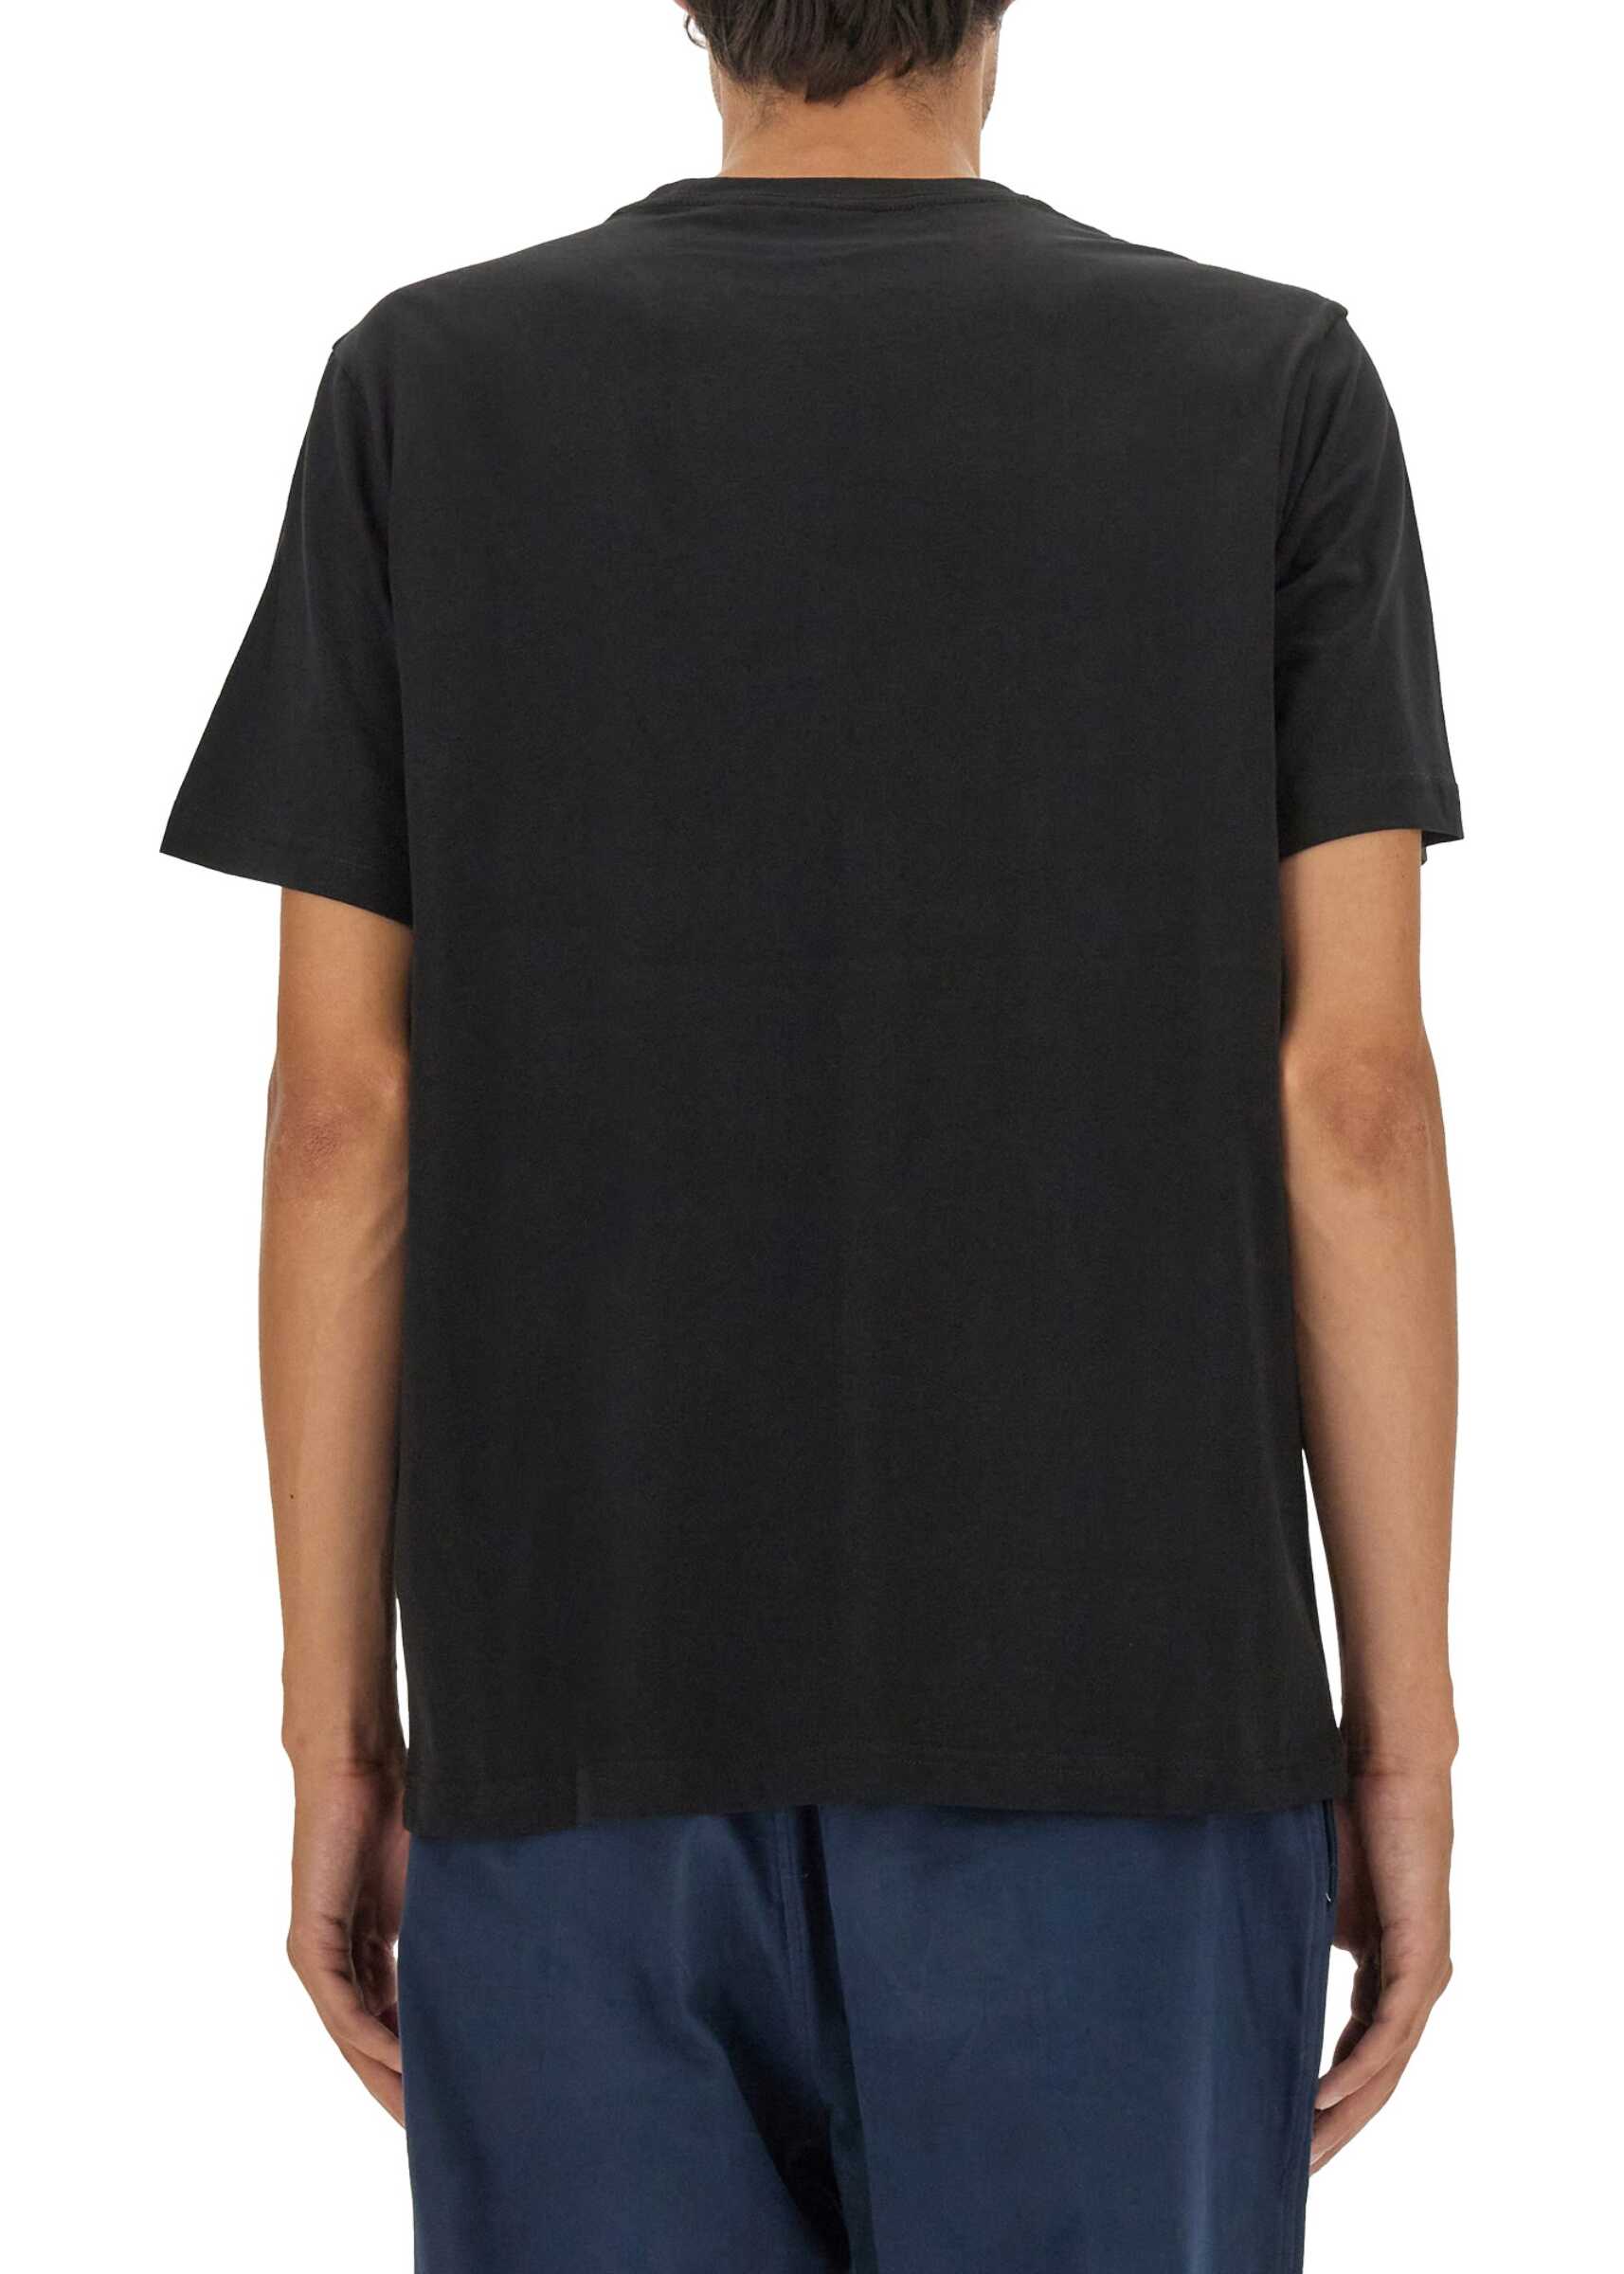 PS by Paul Smith Feathers T-Shirt BLACK